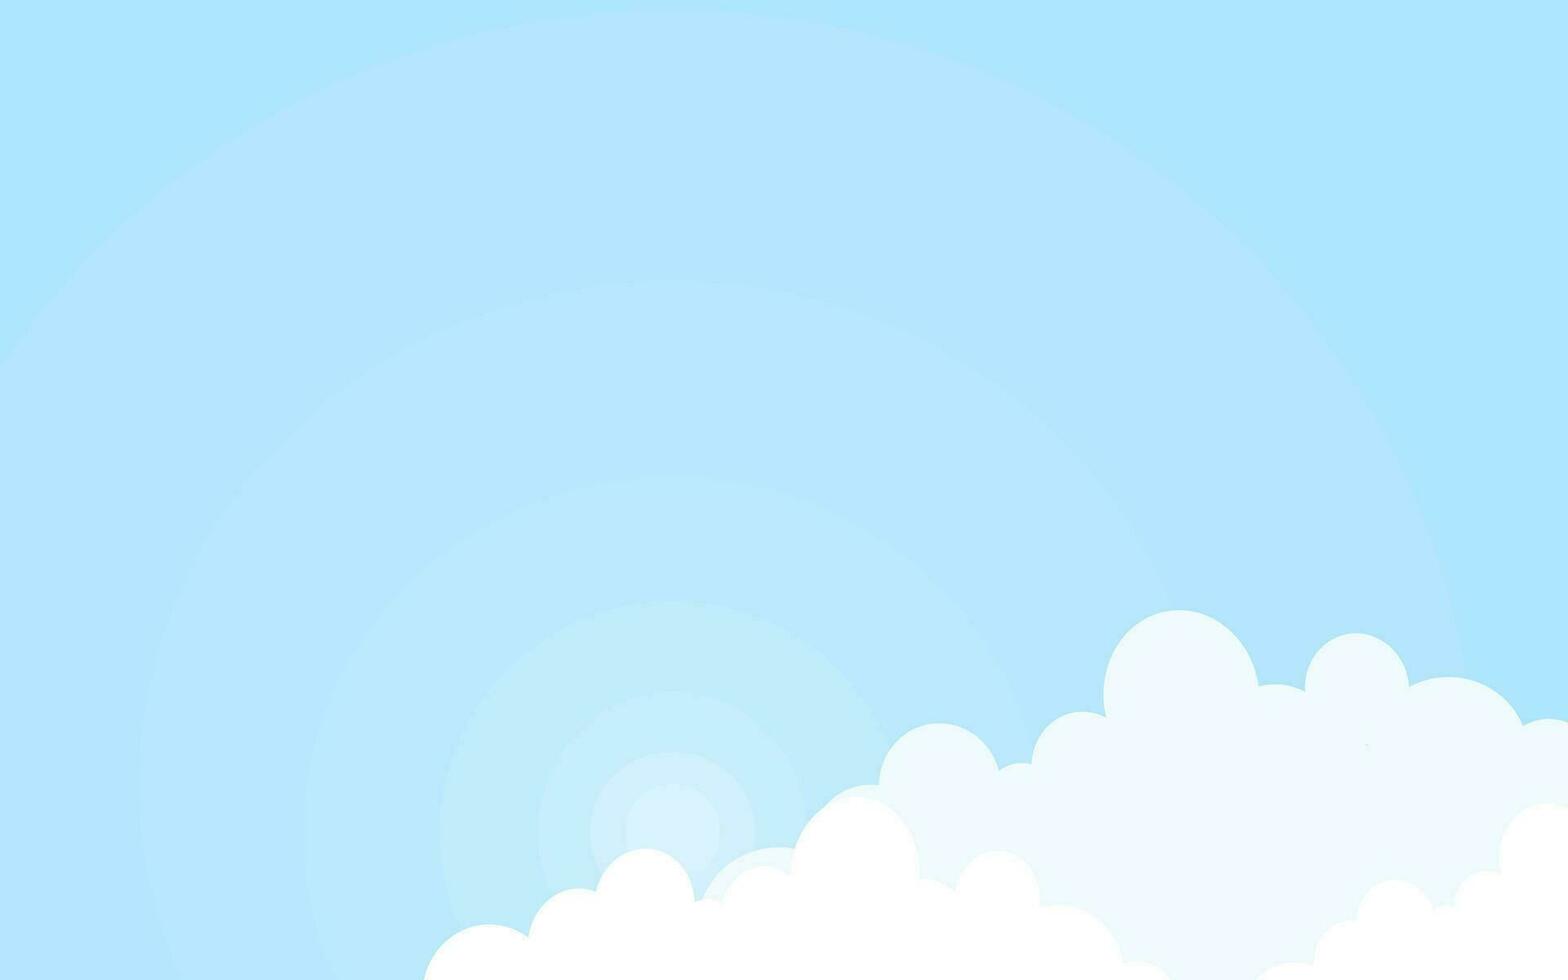 White Clouds Paper Cut With Blue Sky Background vector